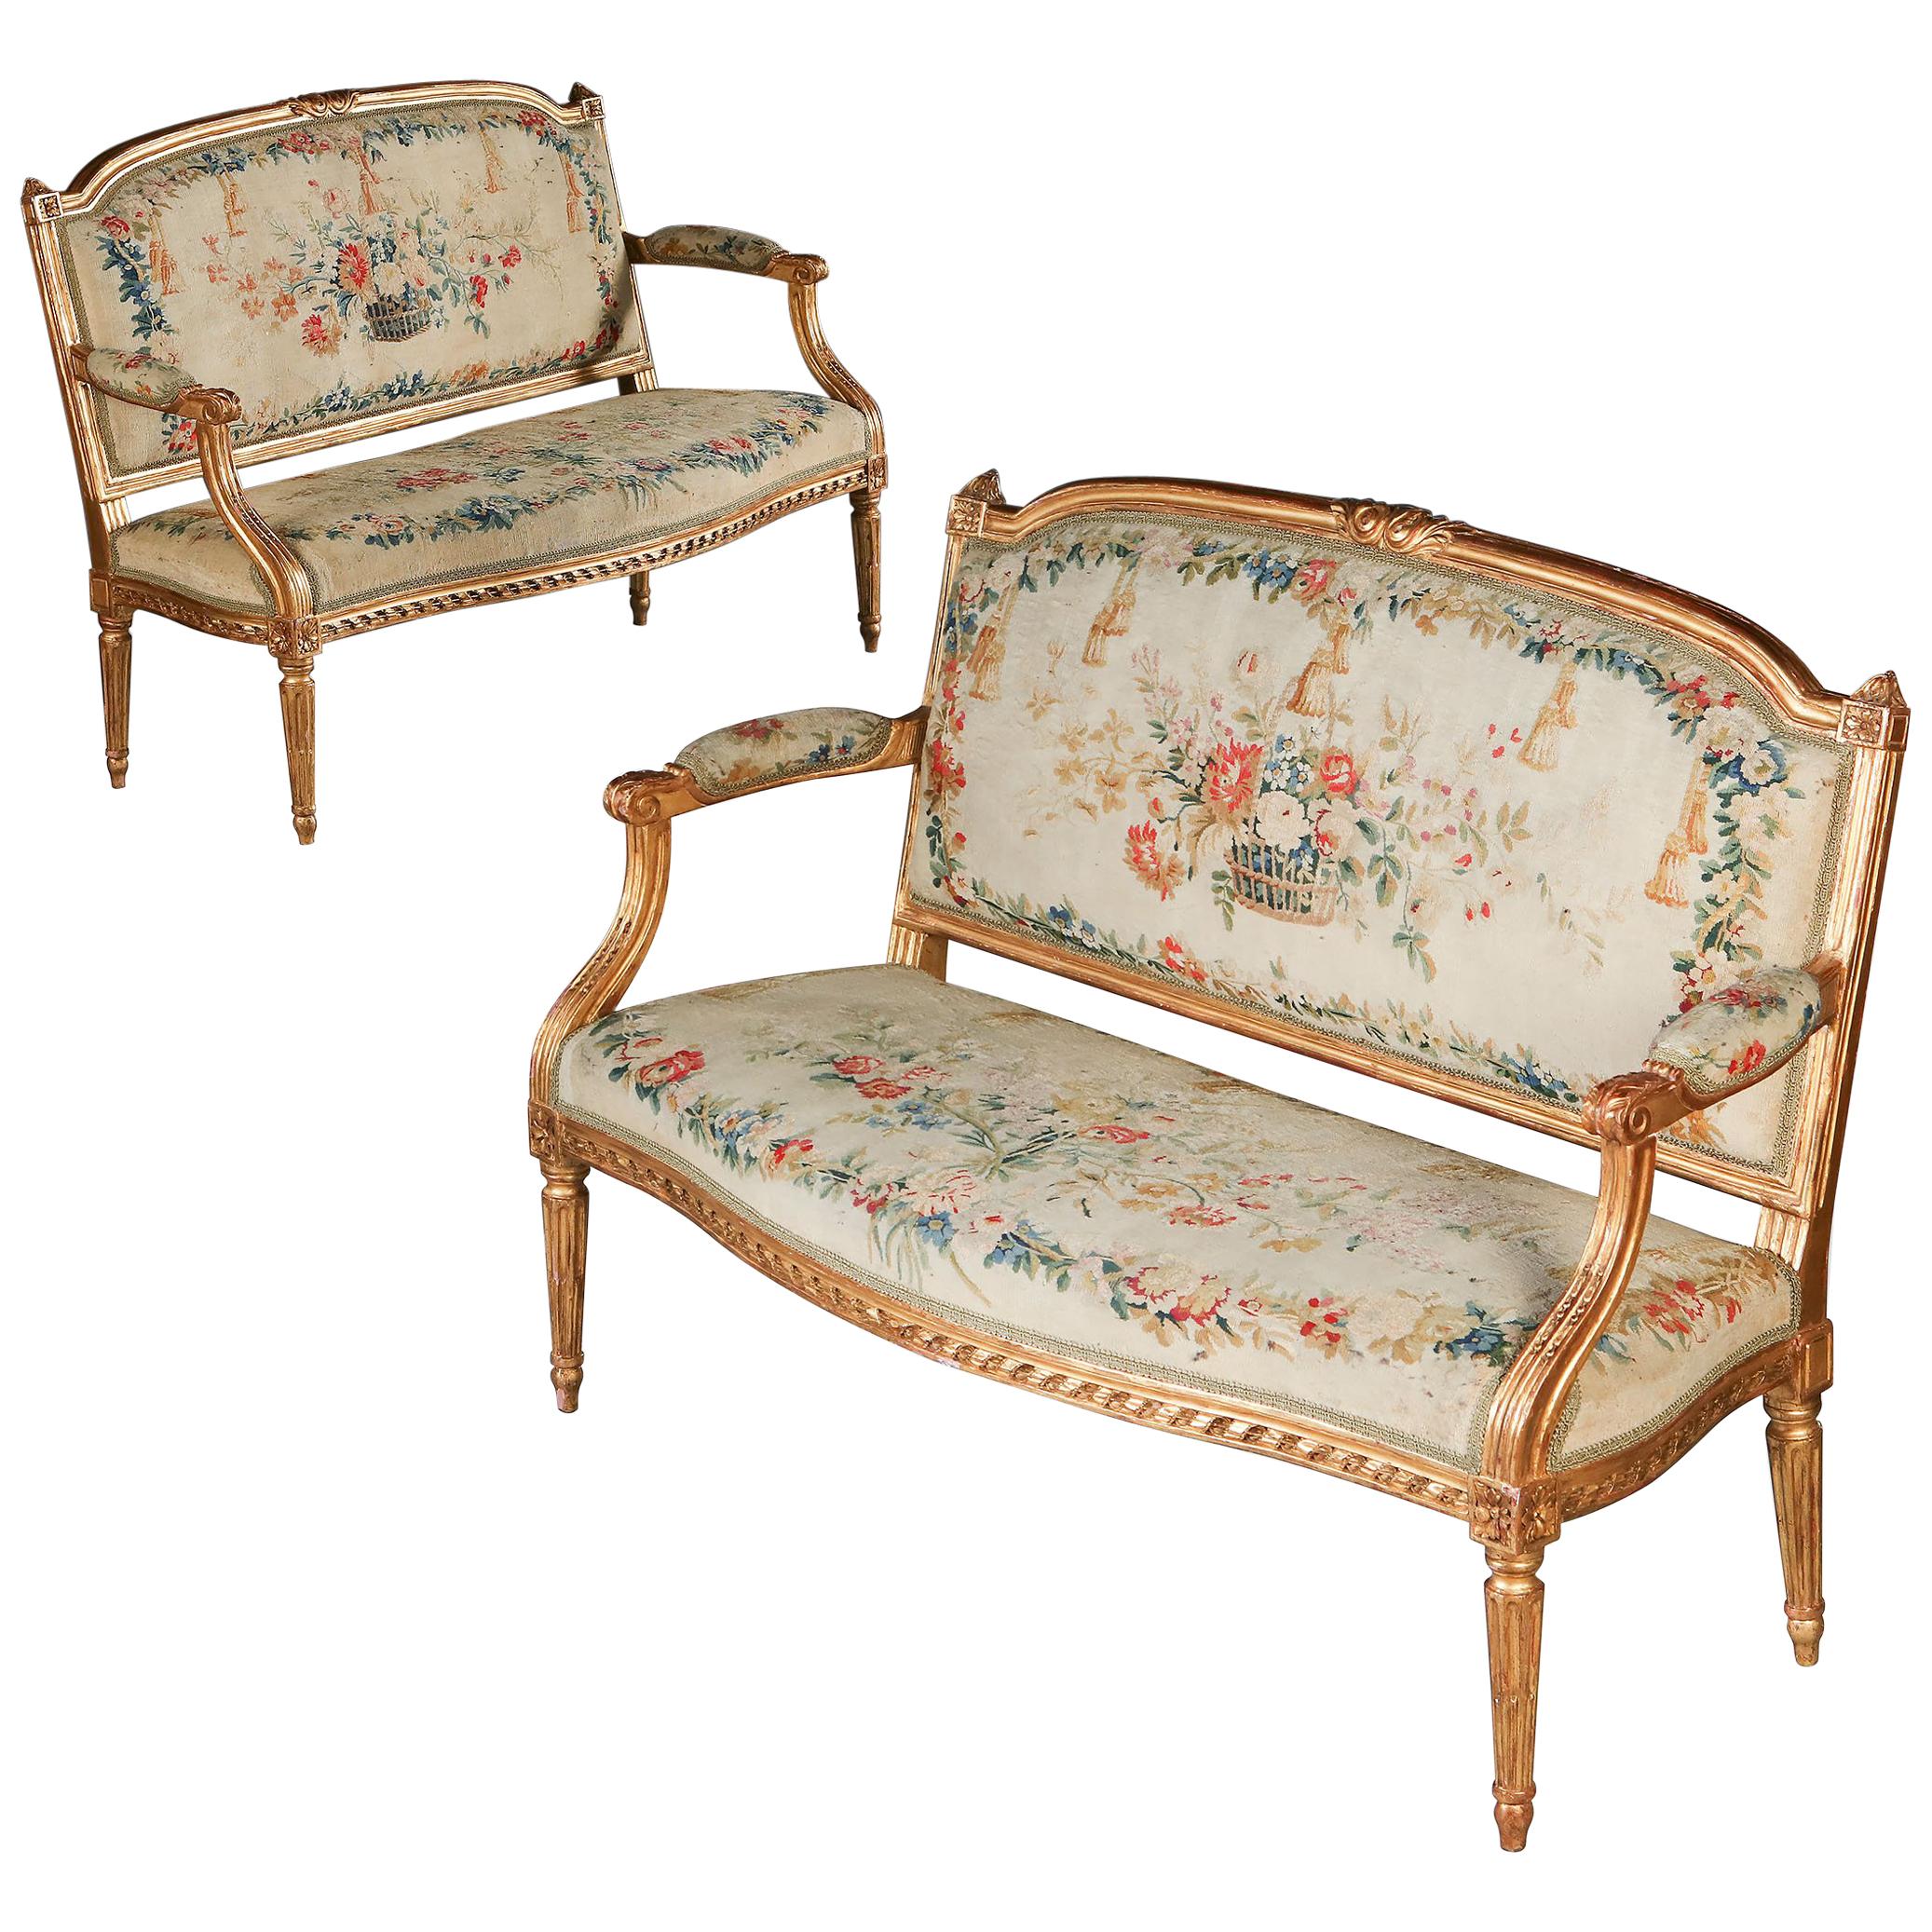 Pair of Giltwood Canapes, Louis XVI, 18th Century, Stamped Pierre Laroque